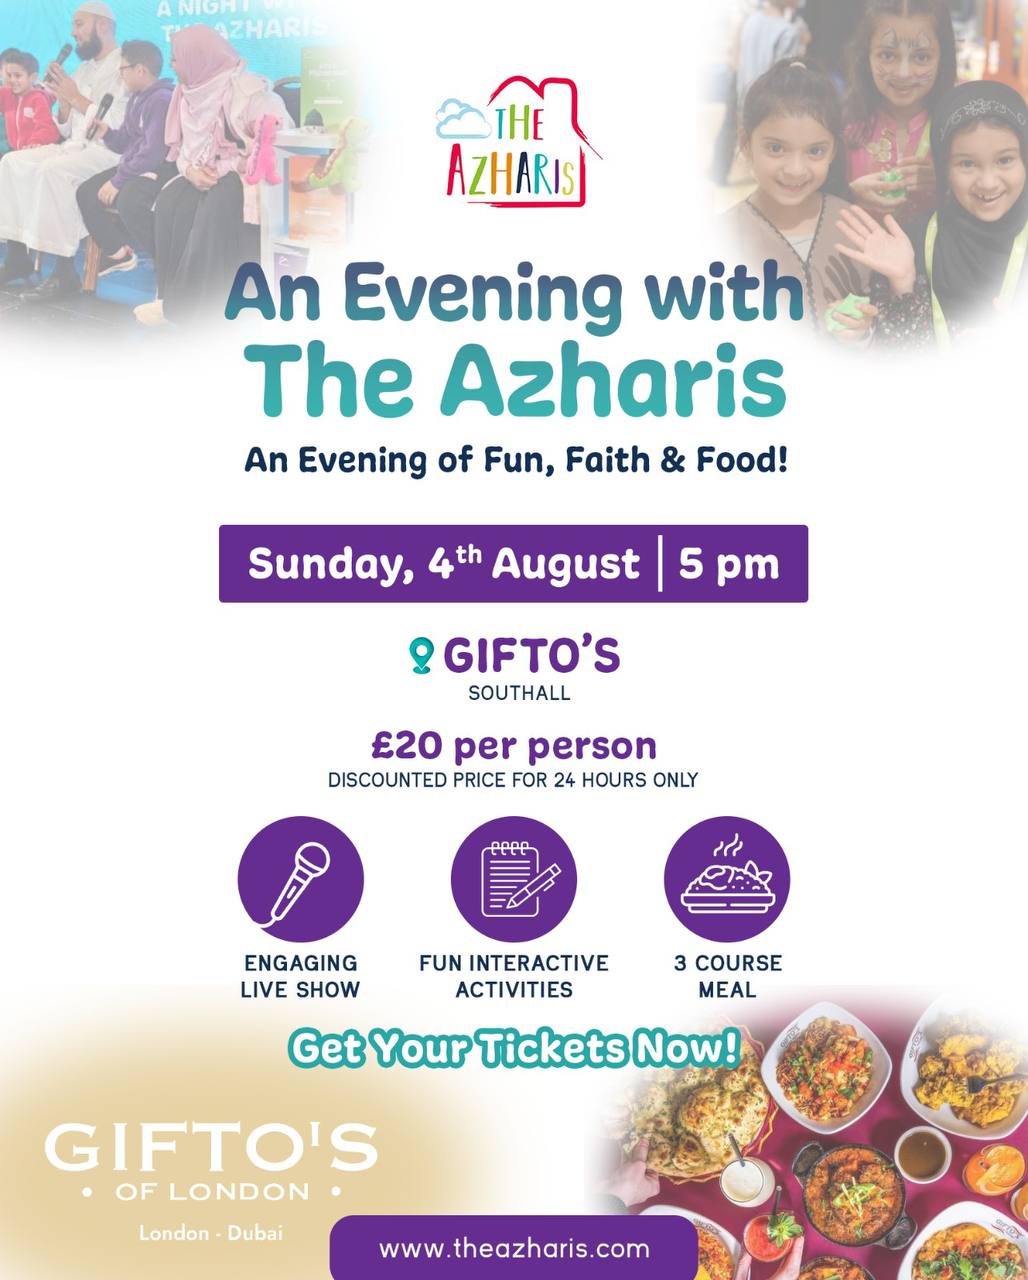 West London (Gifto's, Southall) - Evening with The Azharis - Adult & Child Ticket